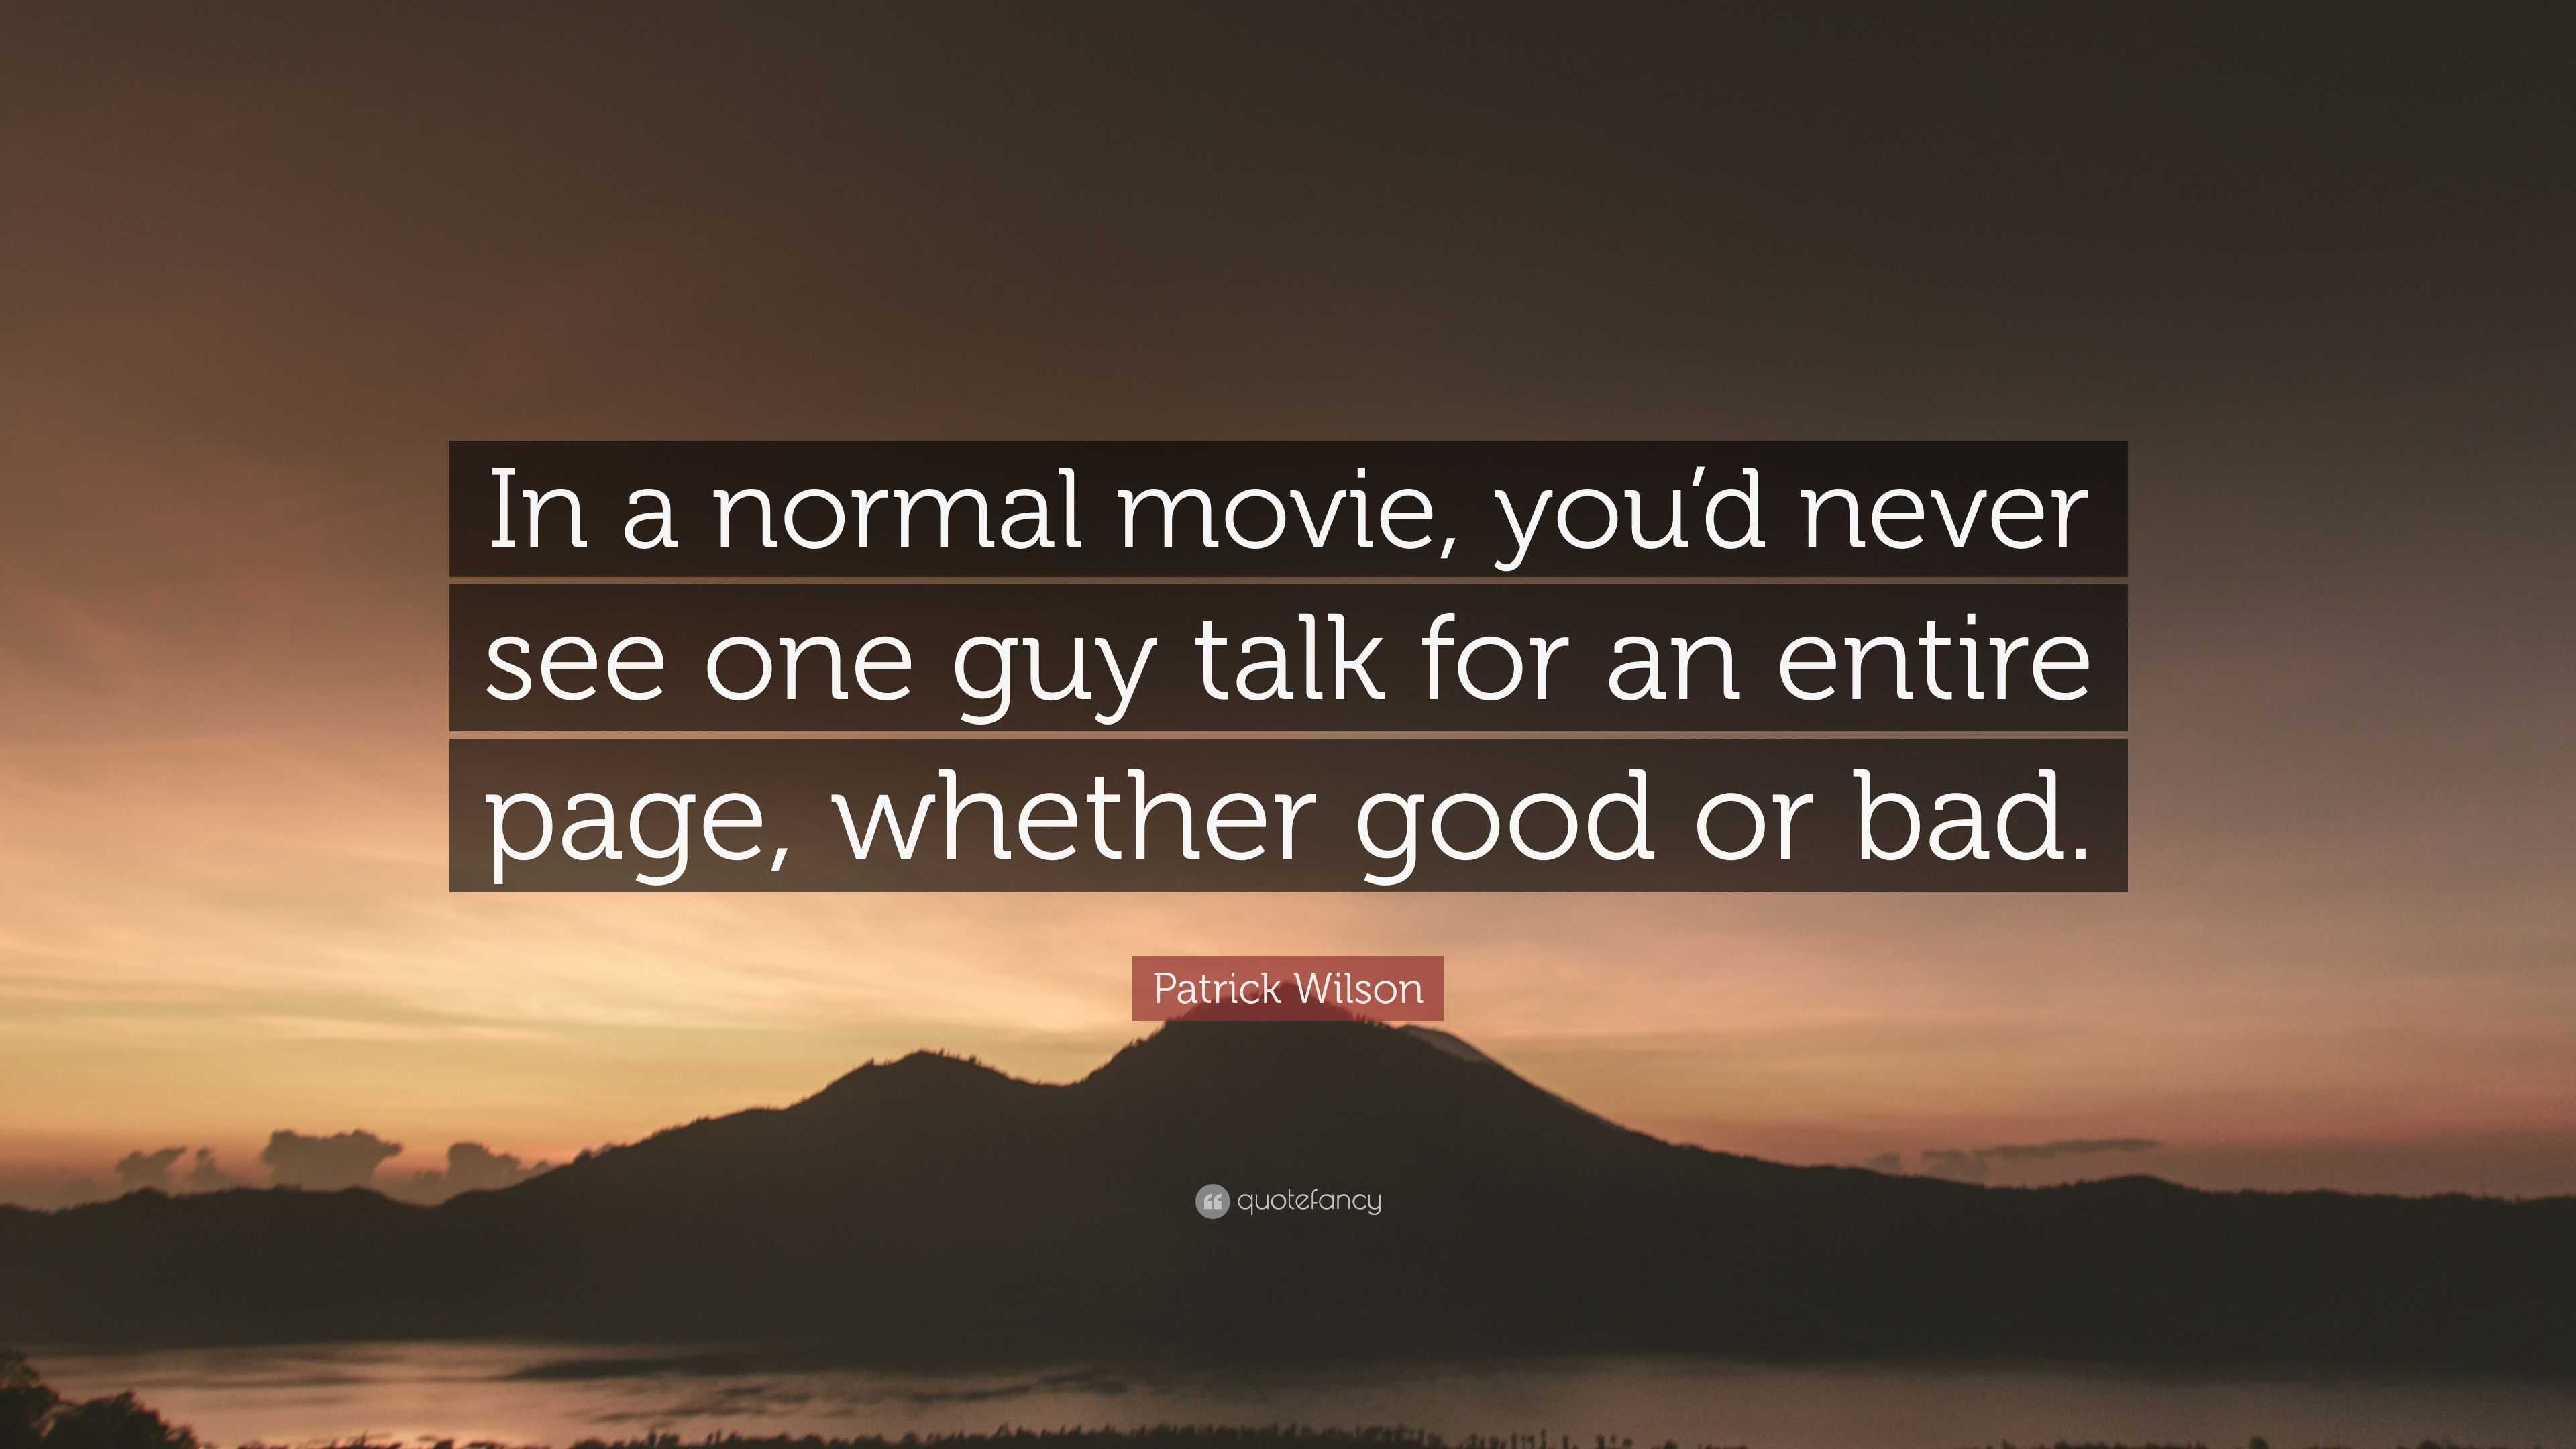 Patrick Wilson Quote: “In a normal movie, you'd never see one guy